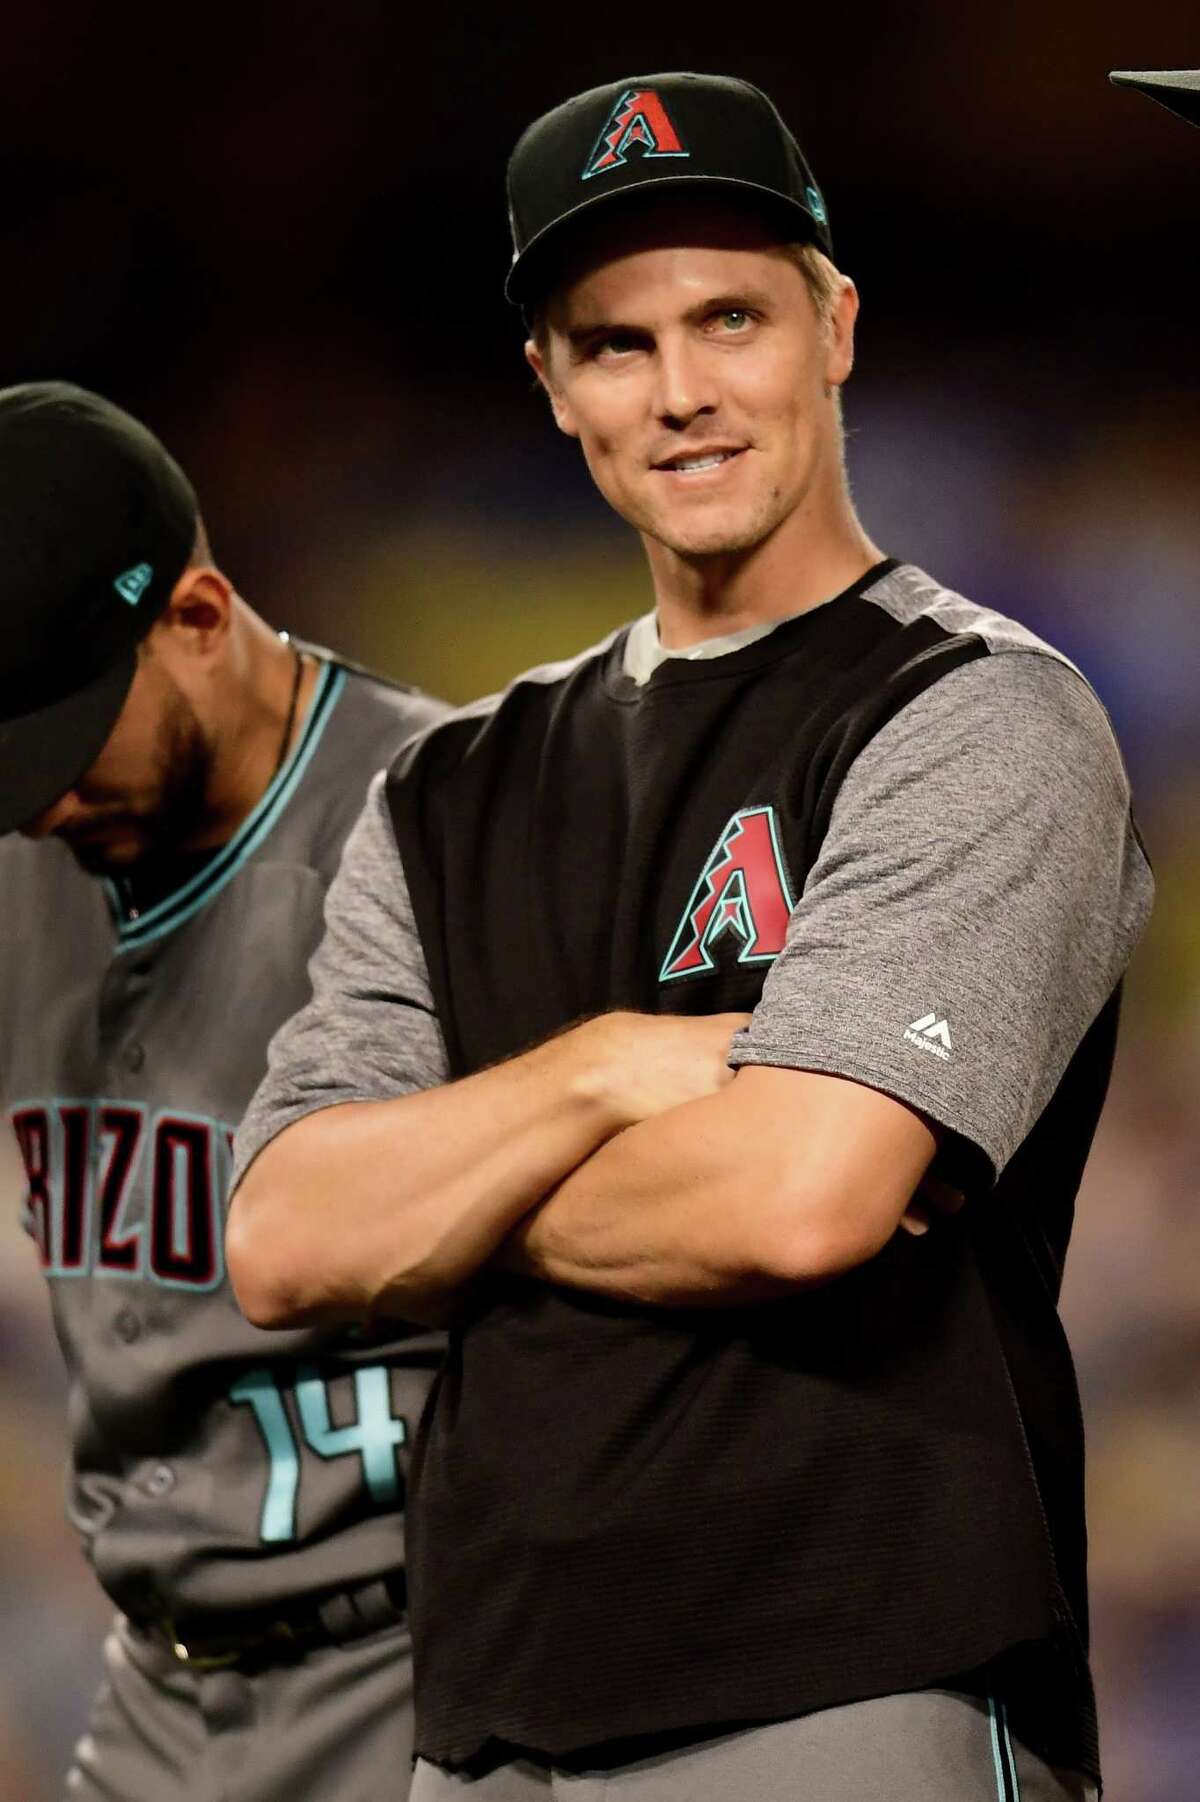 LOS ANGELES, CA - OCTOBER 06: Zack Greinke #21 of the Arizona Diamondbacks looks on during player introductions before taking on the Los Angeles Dodgers in game one of the National League Division Series at Dodger Stadium on October 6, 2017 in Los Angeles, California. (Photo by Harry How/Getty Images) ORG XMIT: 775053742